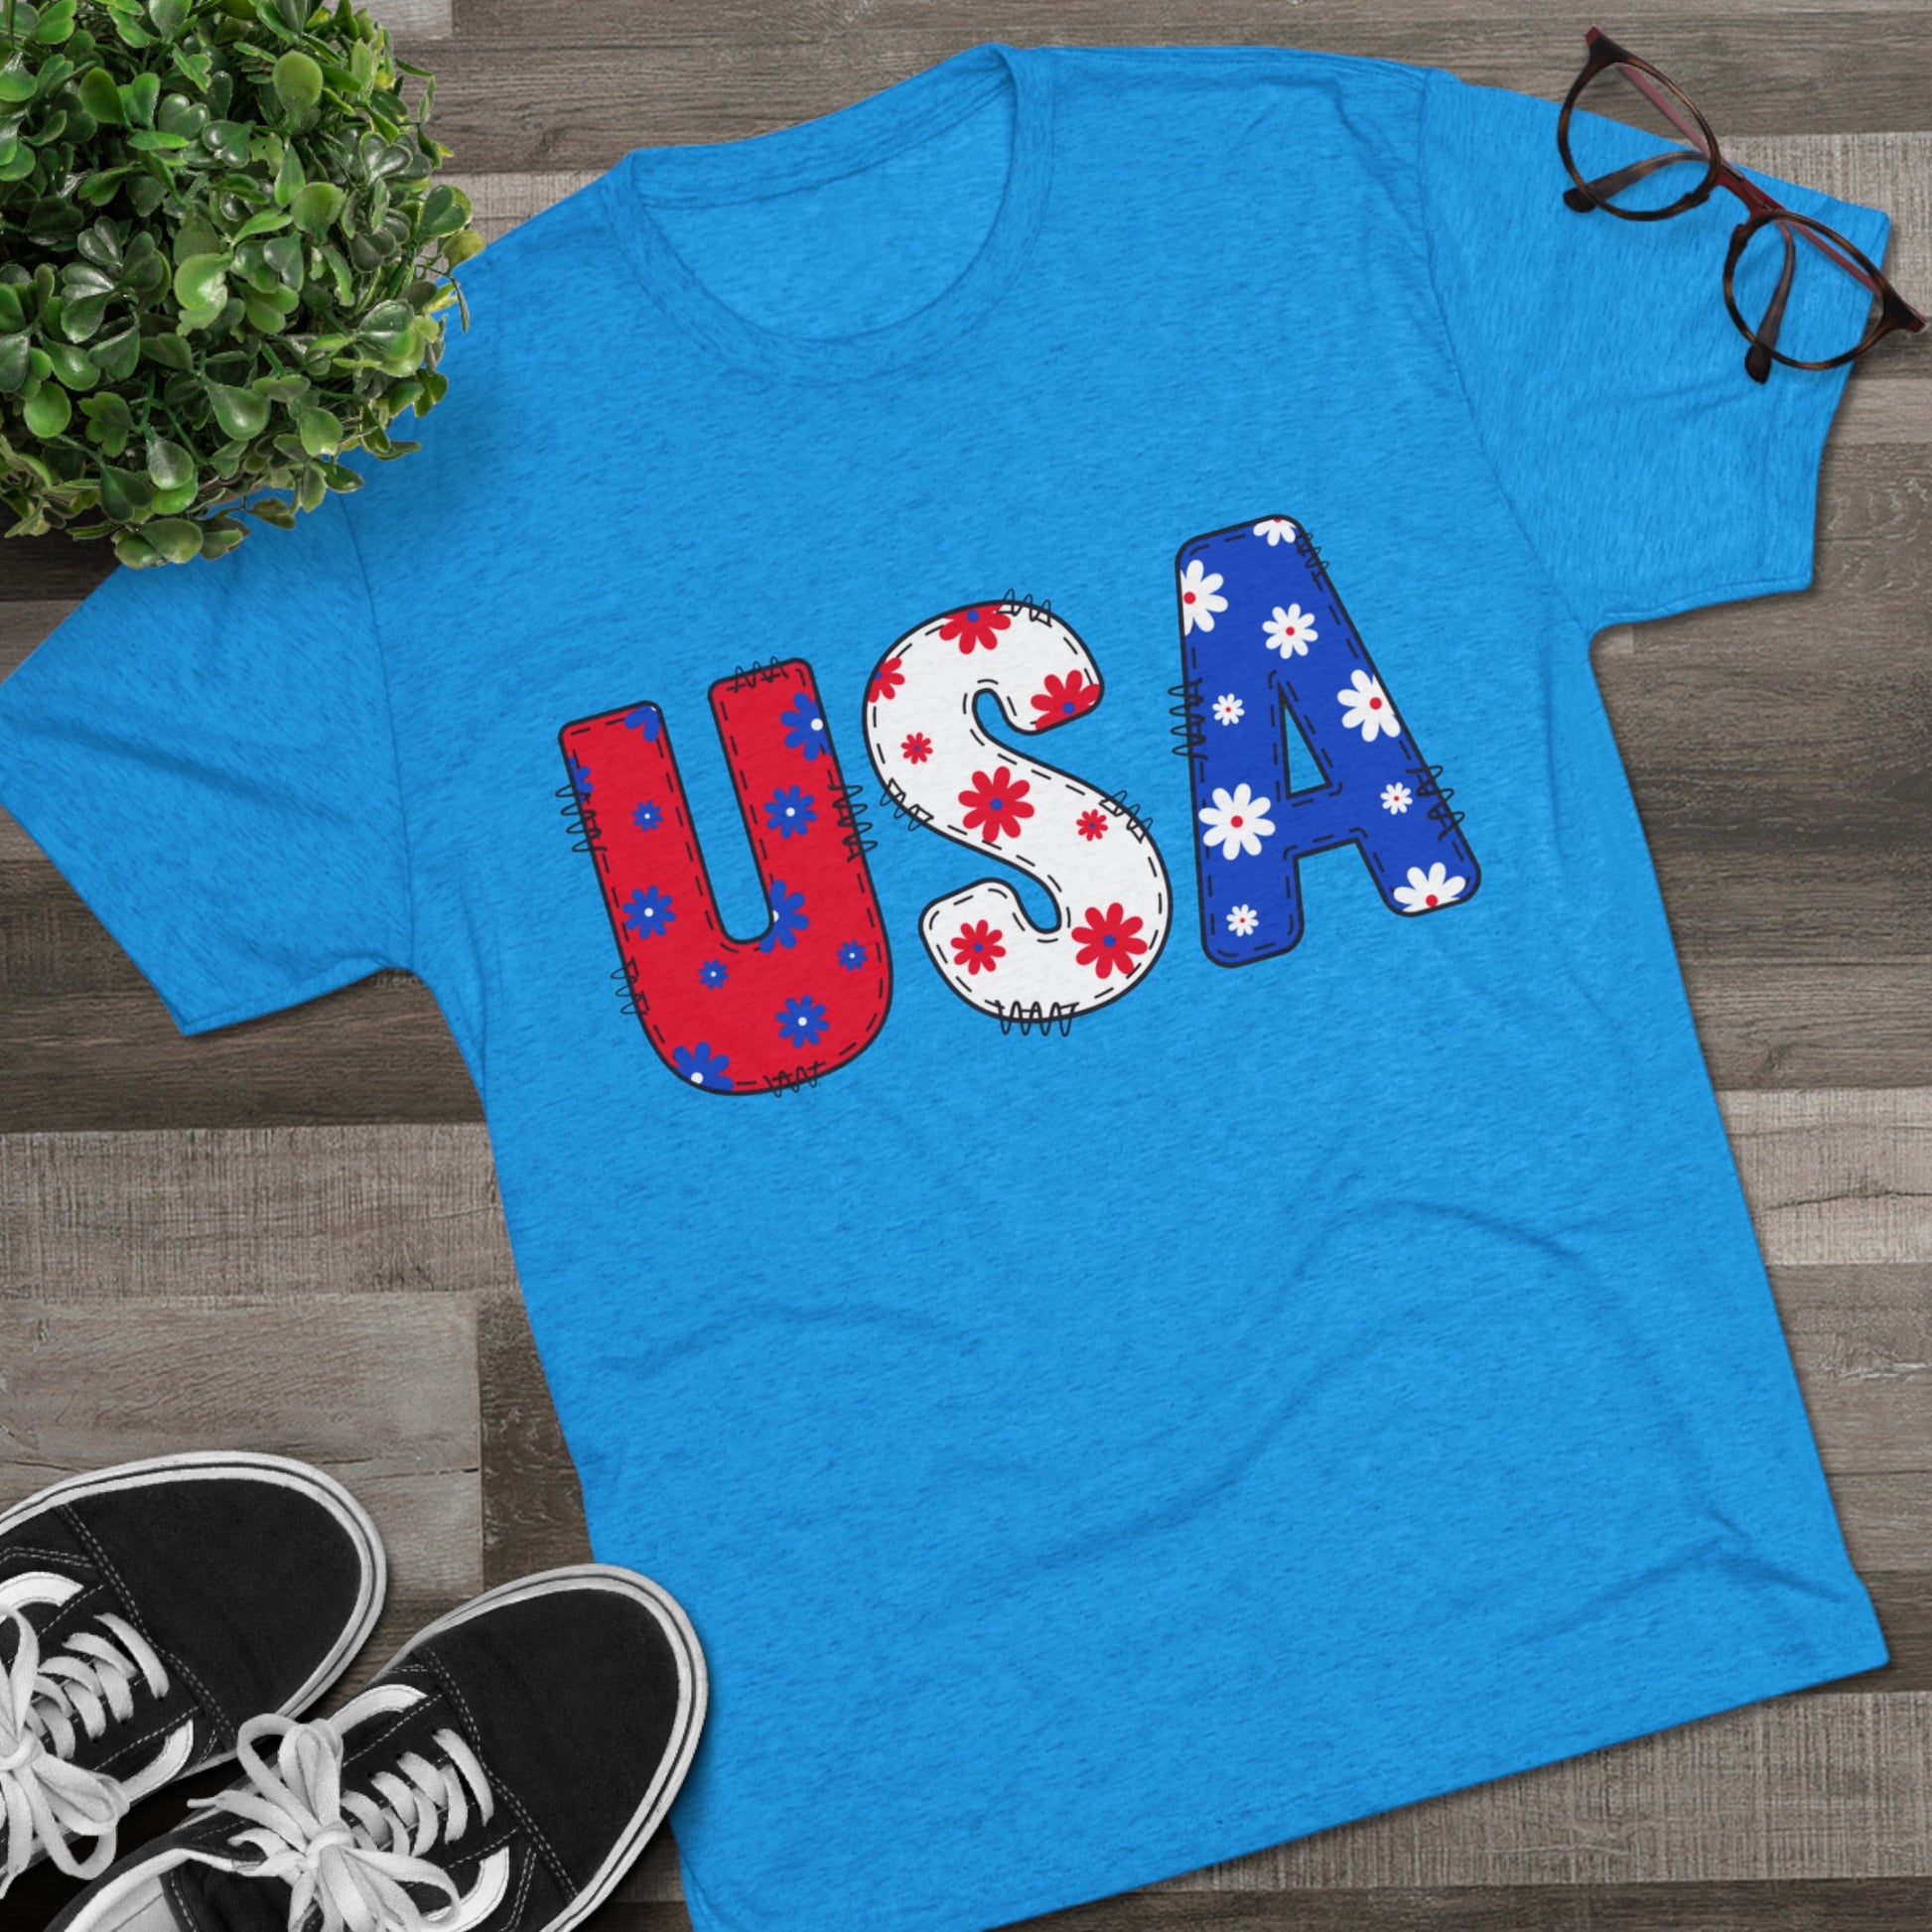 Get trendy with USA Unisex Tri-Blend Crew Tee - T-Shirt available at Good Gift Company. Grab yours for $21.88 today!